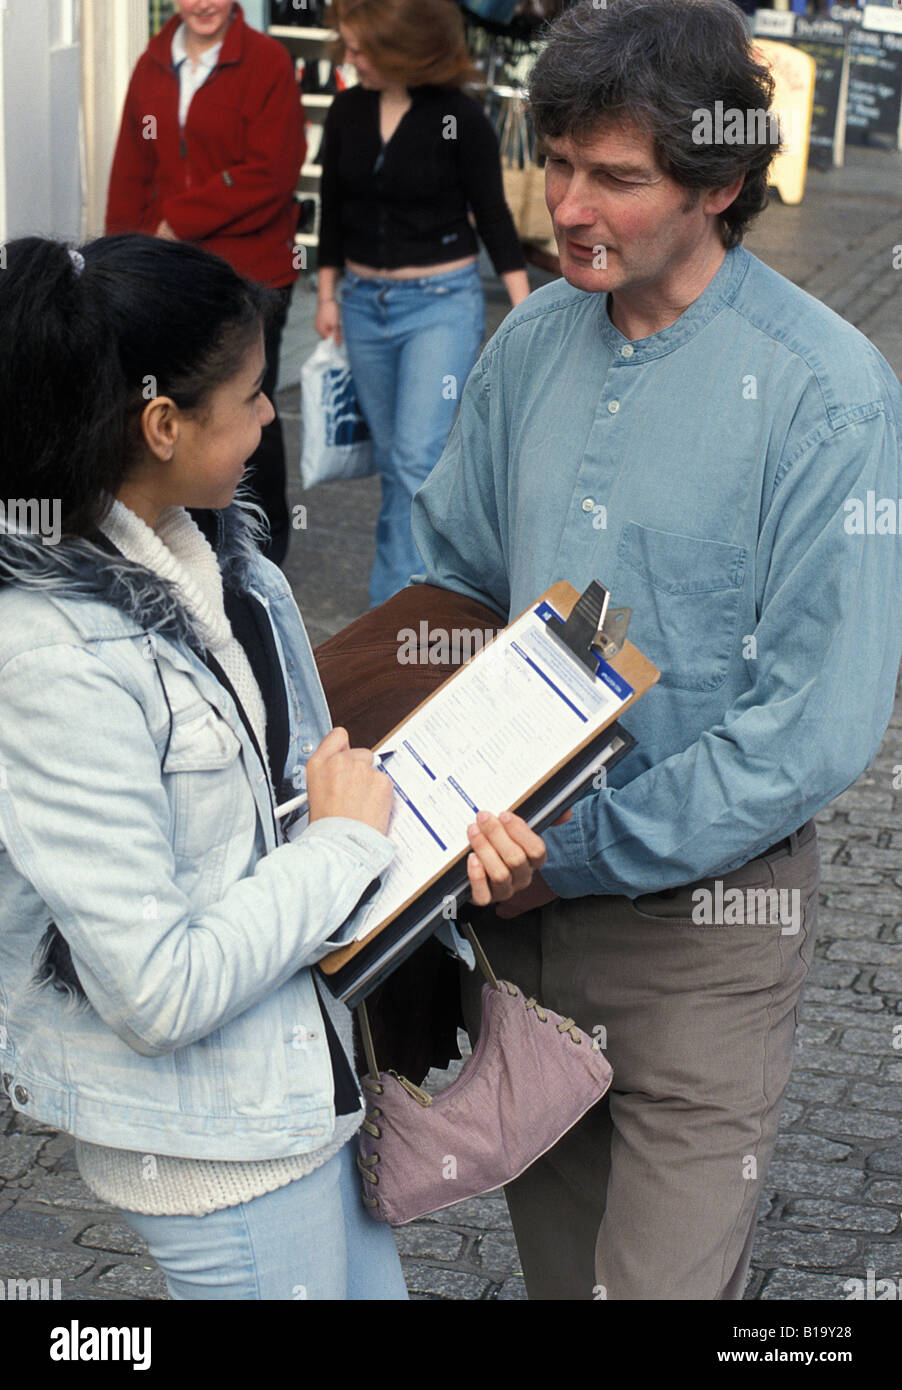 teenage girl with clipboard interviewing man on city street Stock Photo